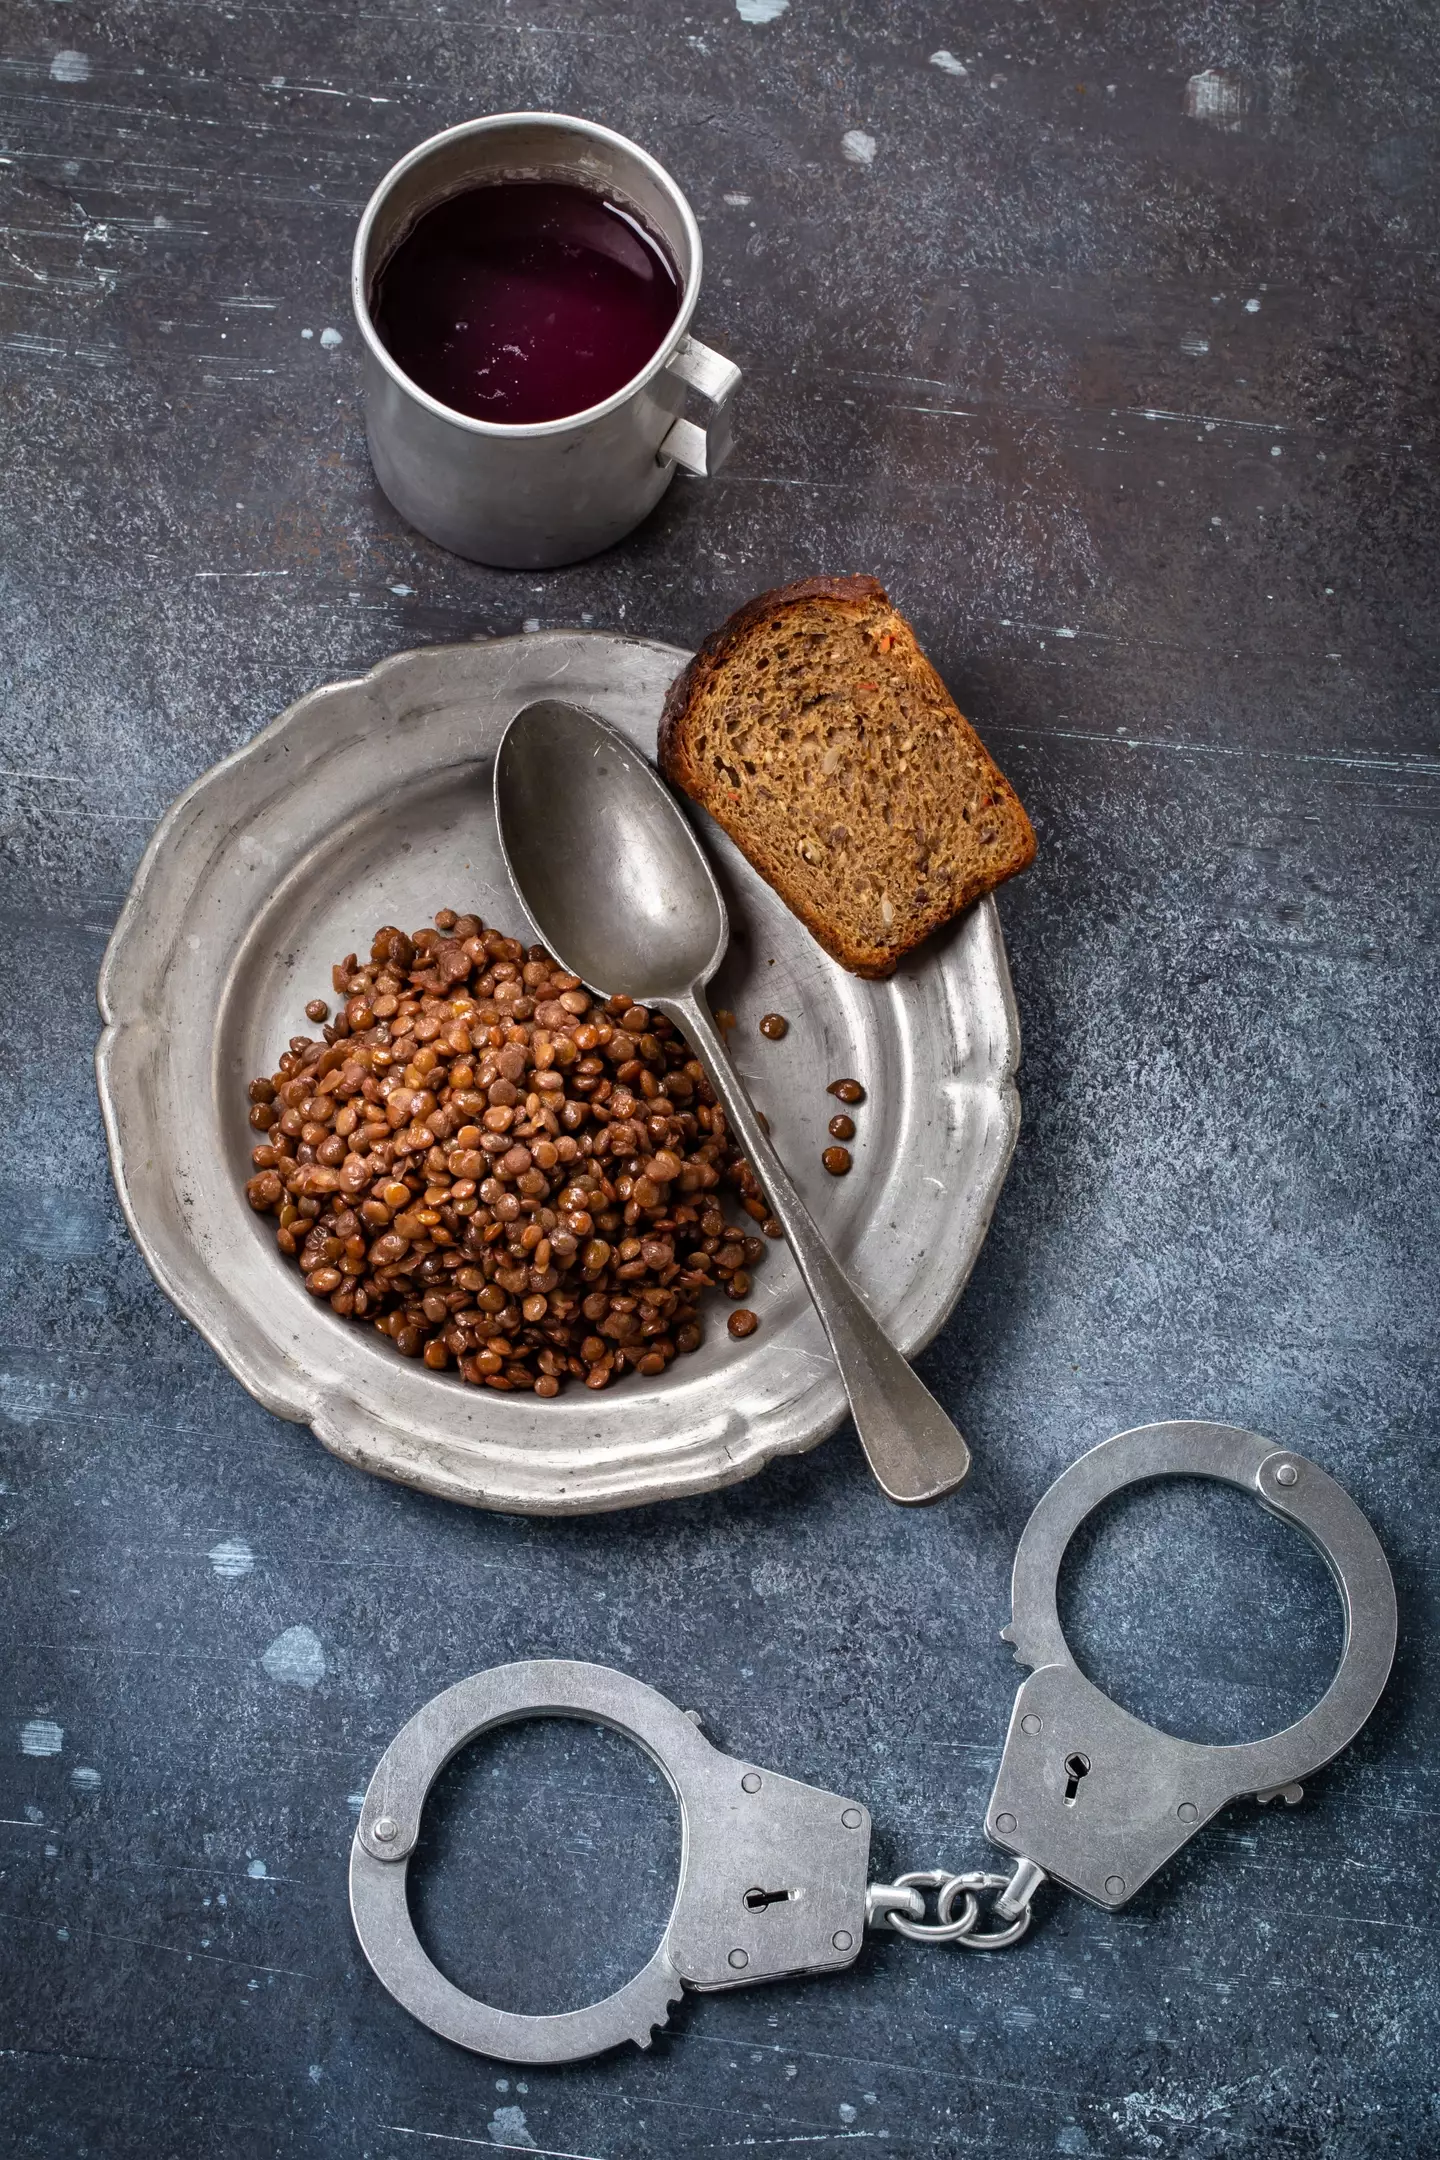 It's not uncommon for death row inmates to ask for unusual final meals.